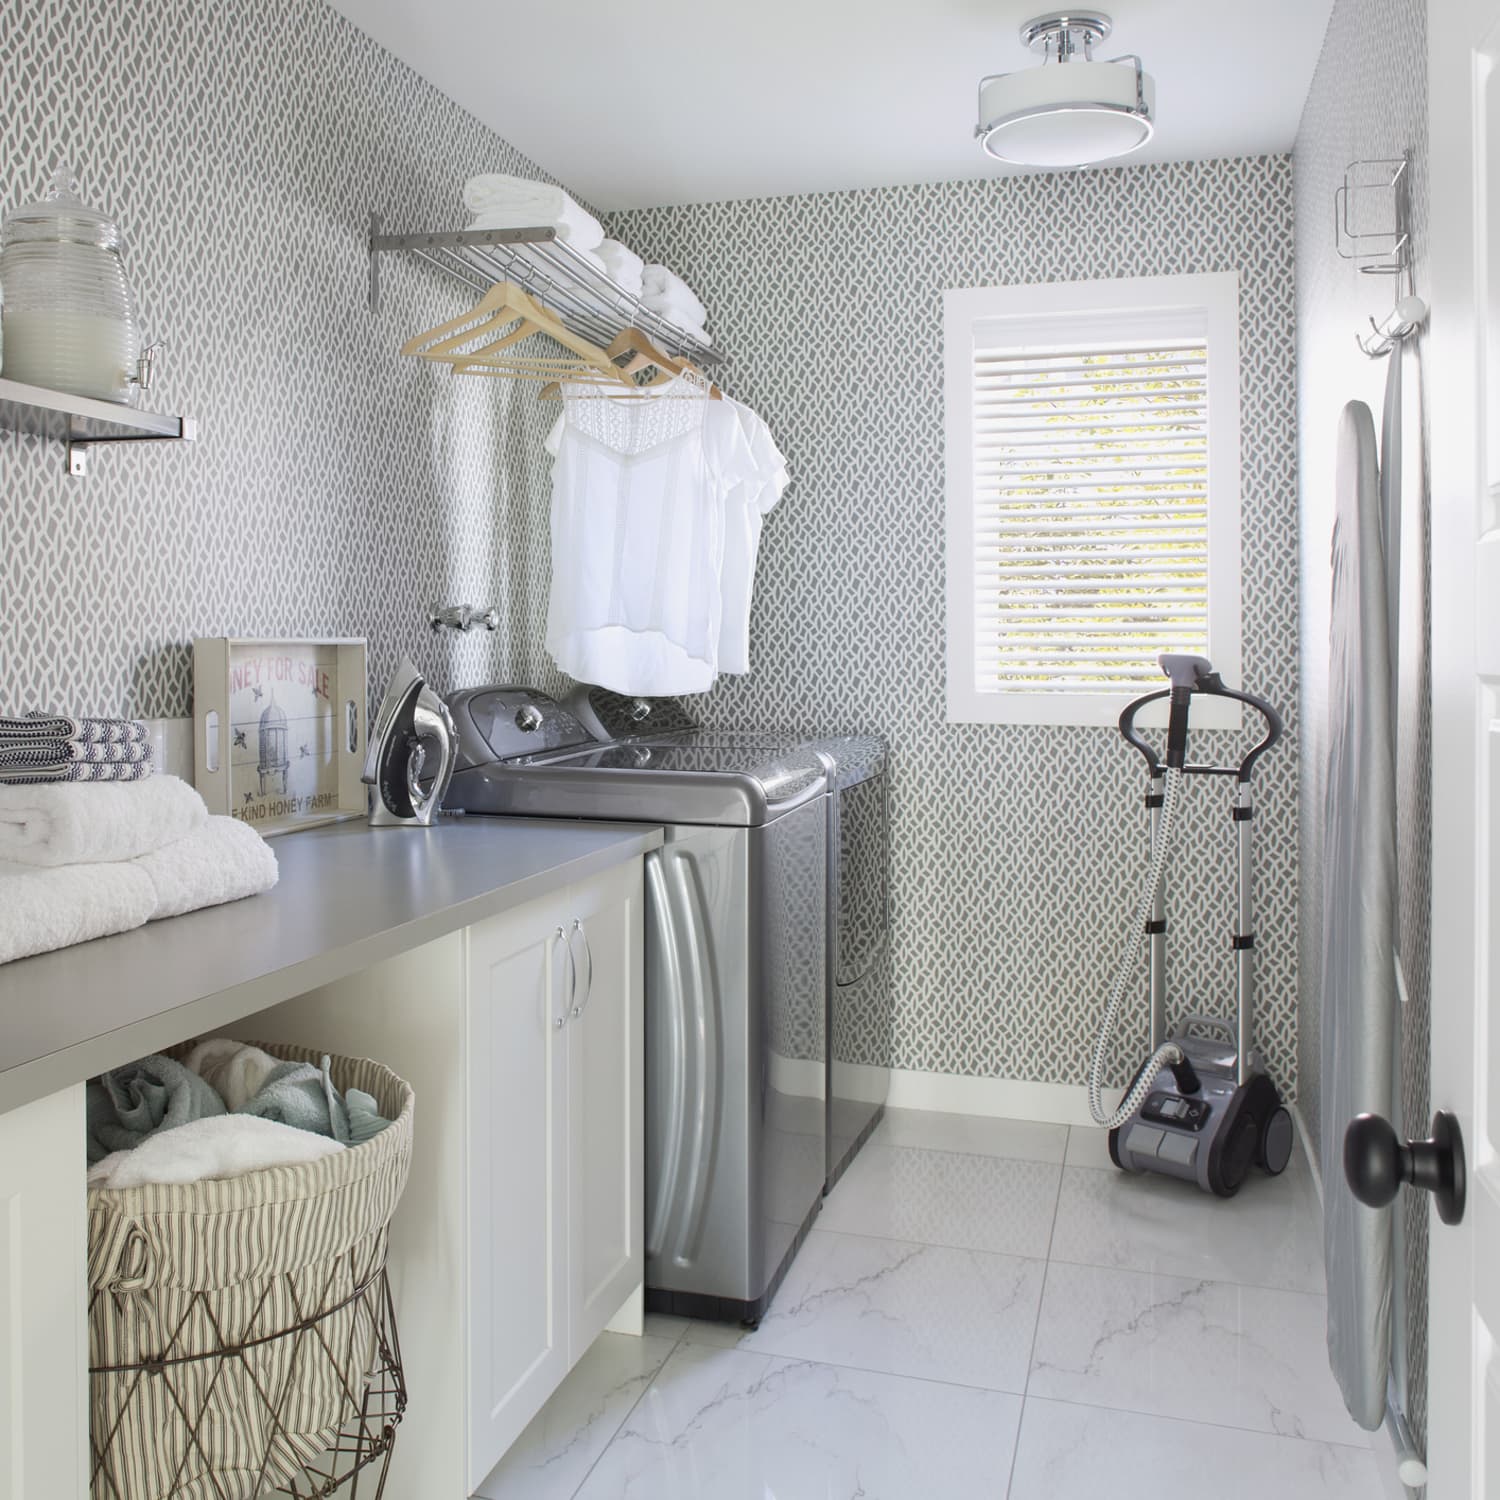 15 Small Laundry Room Ideas With a Top Loading Washer